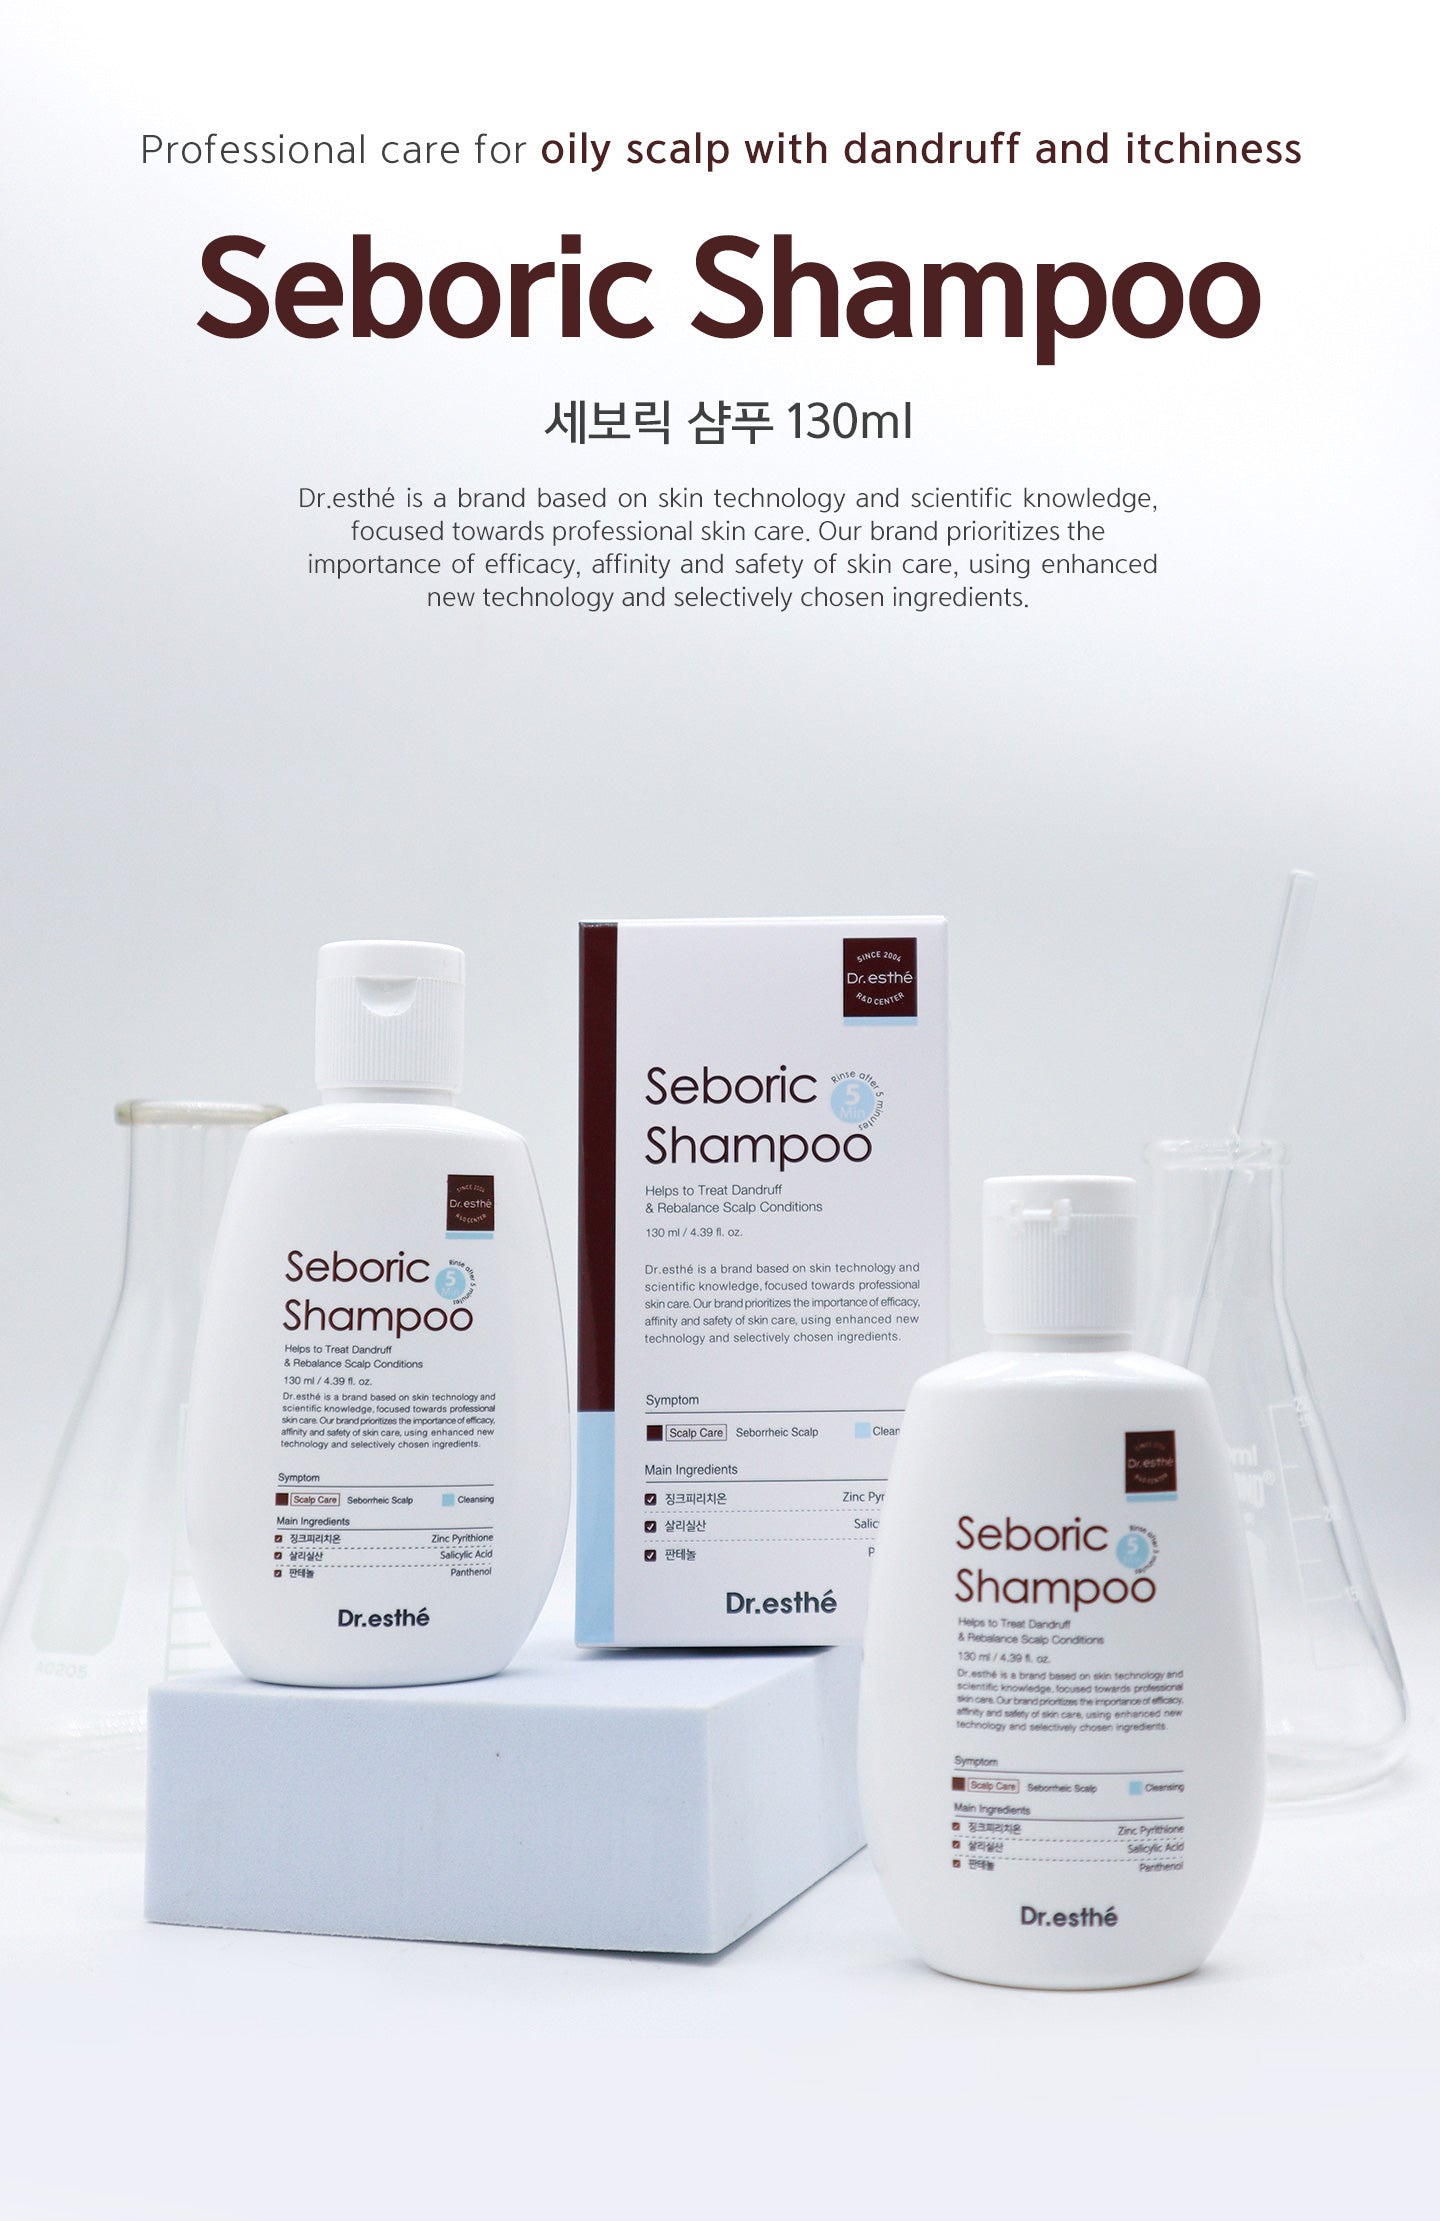 Professional care for oily scalp with dandruff and itchiness. Seboric shampoo.